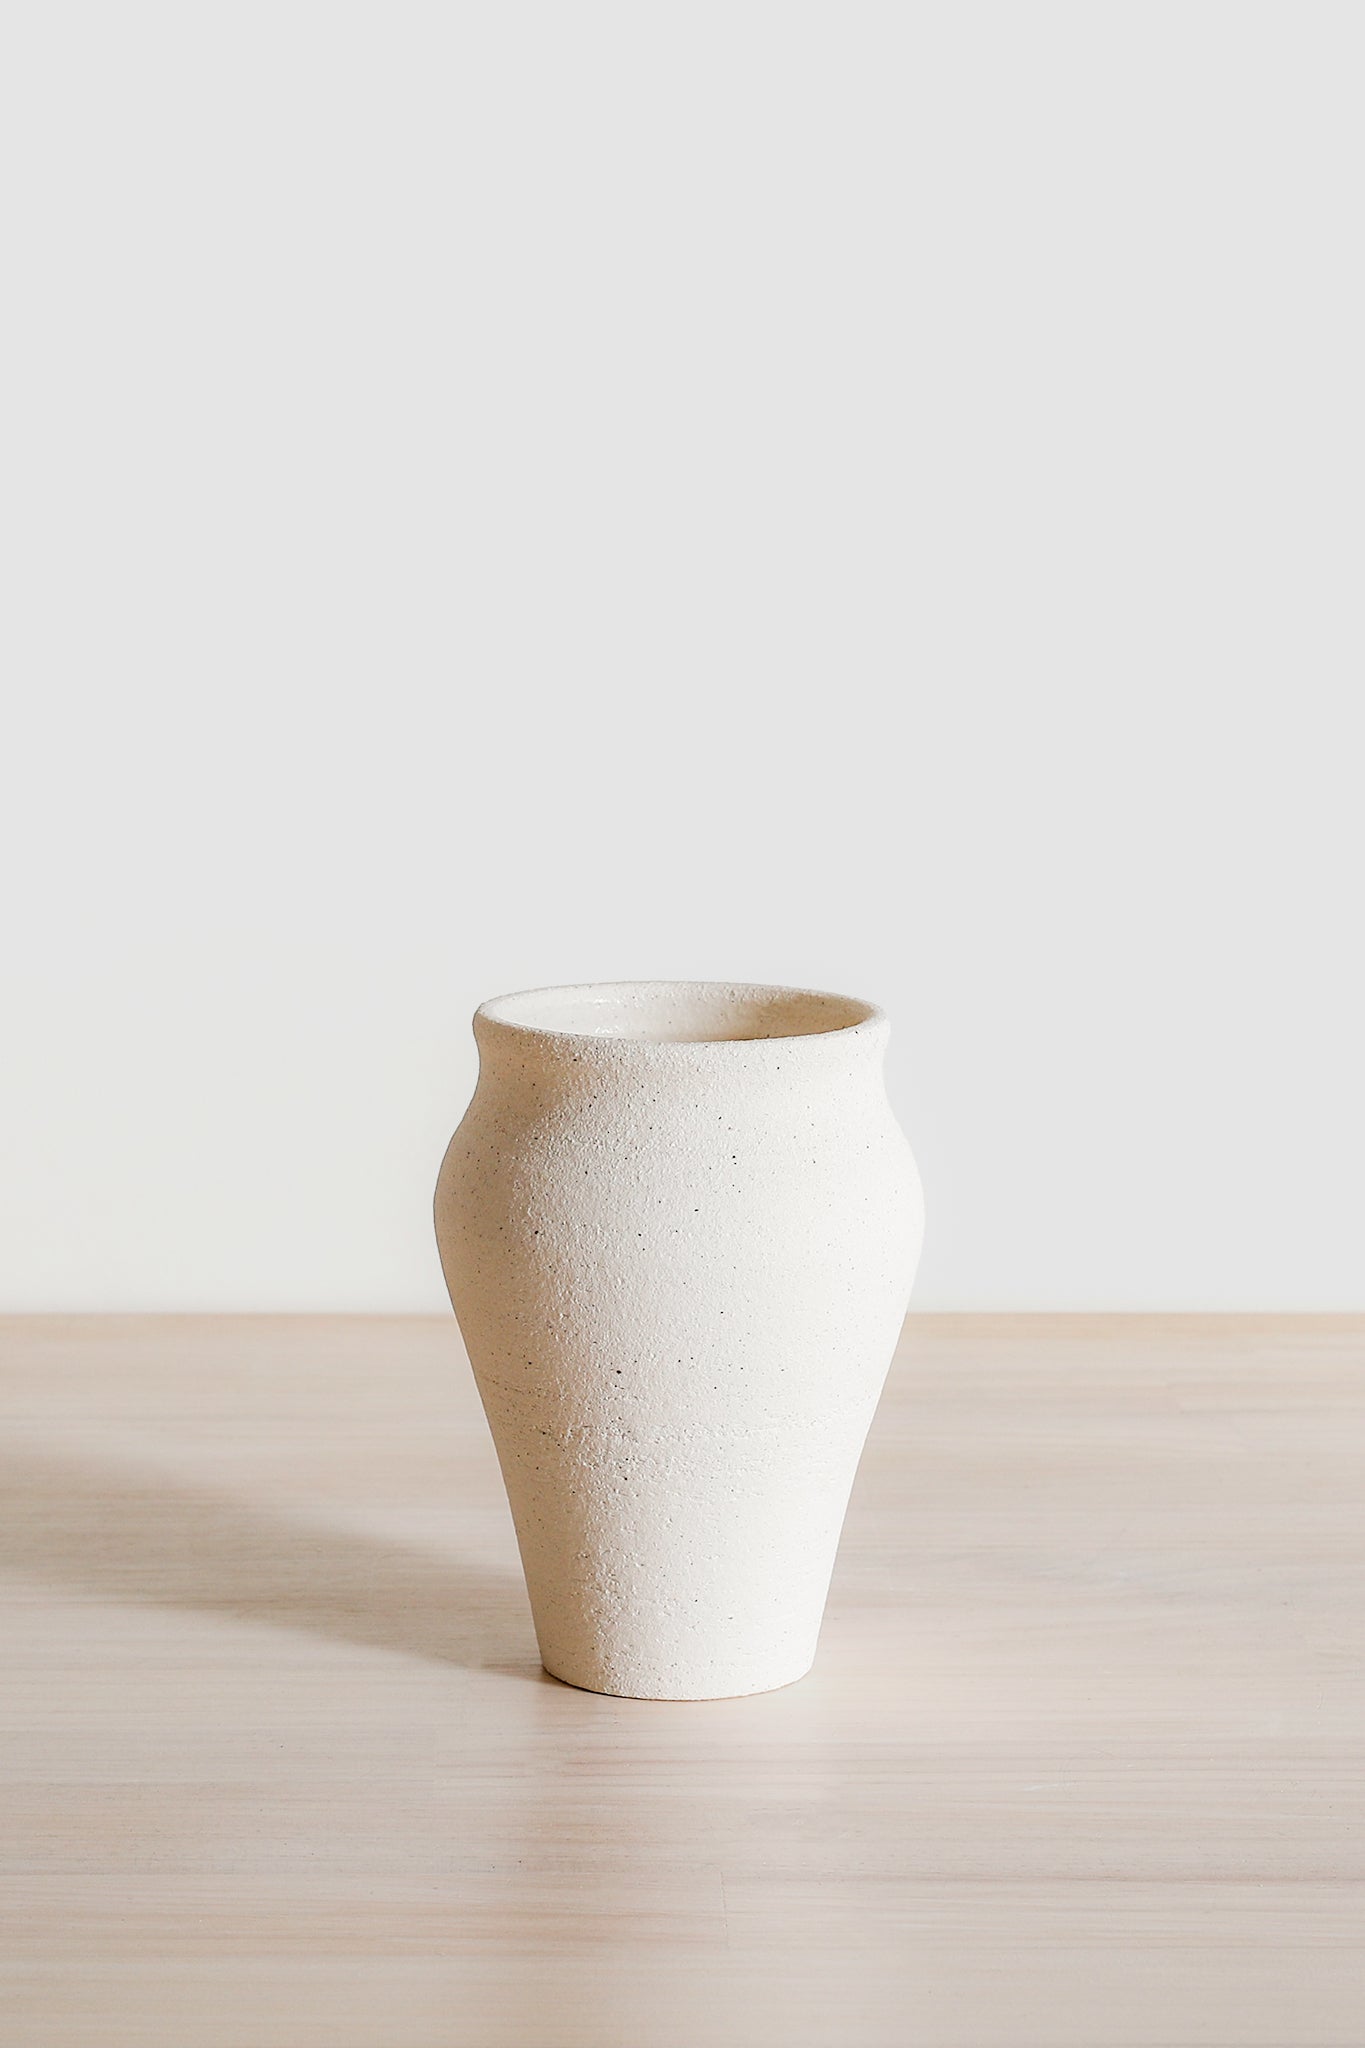 END OF PRODUCTION | The Vase